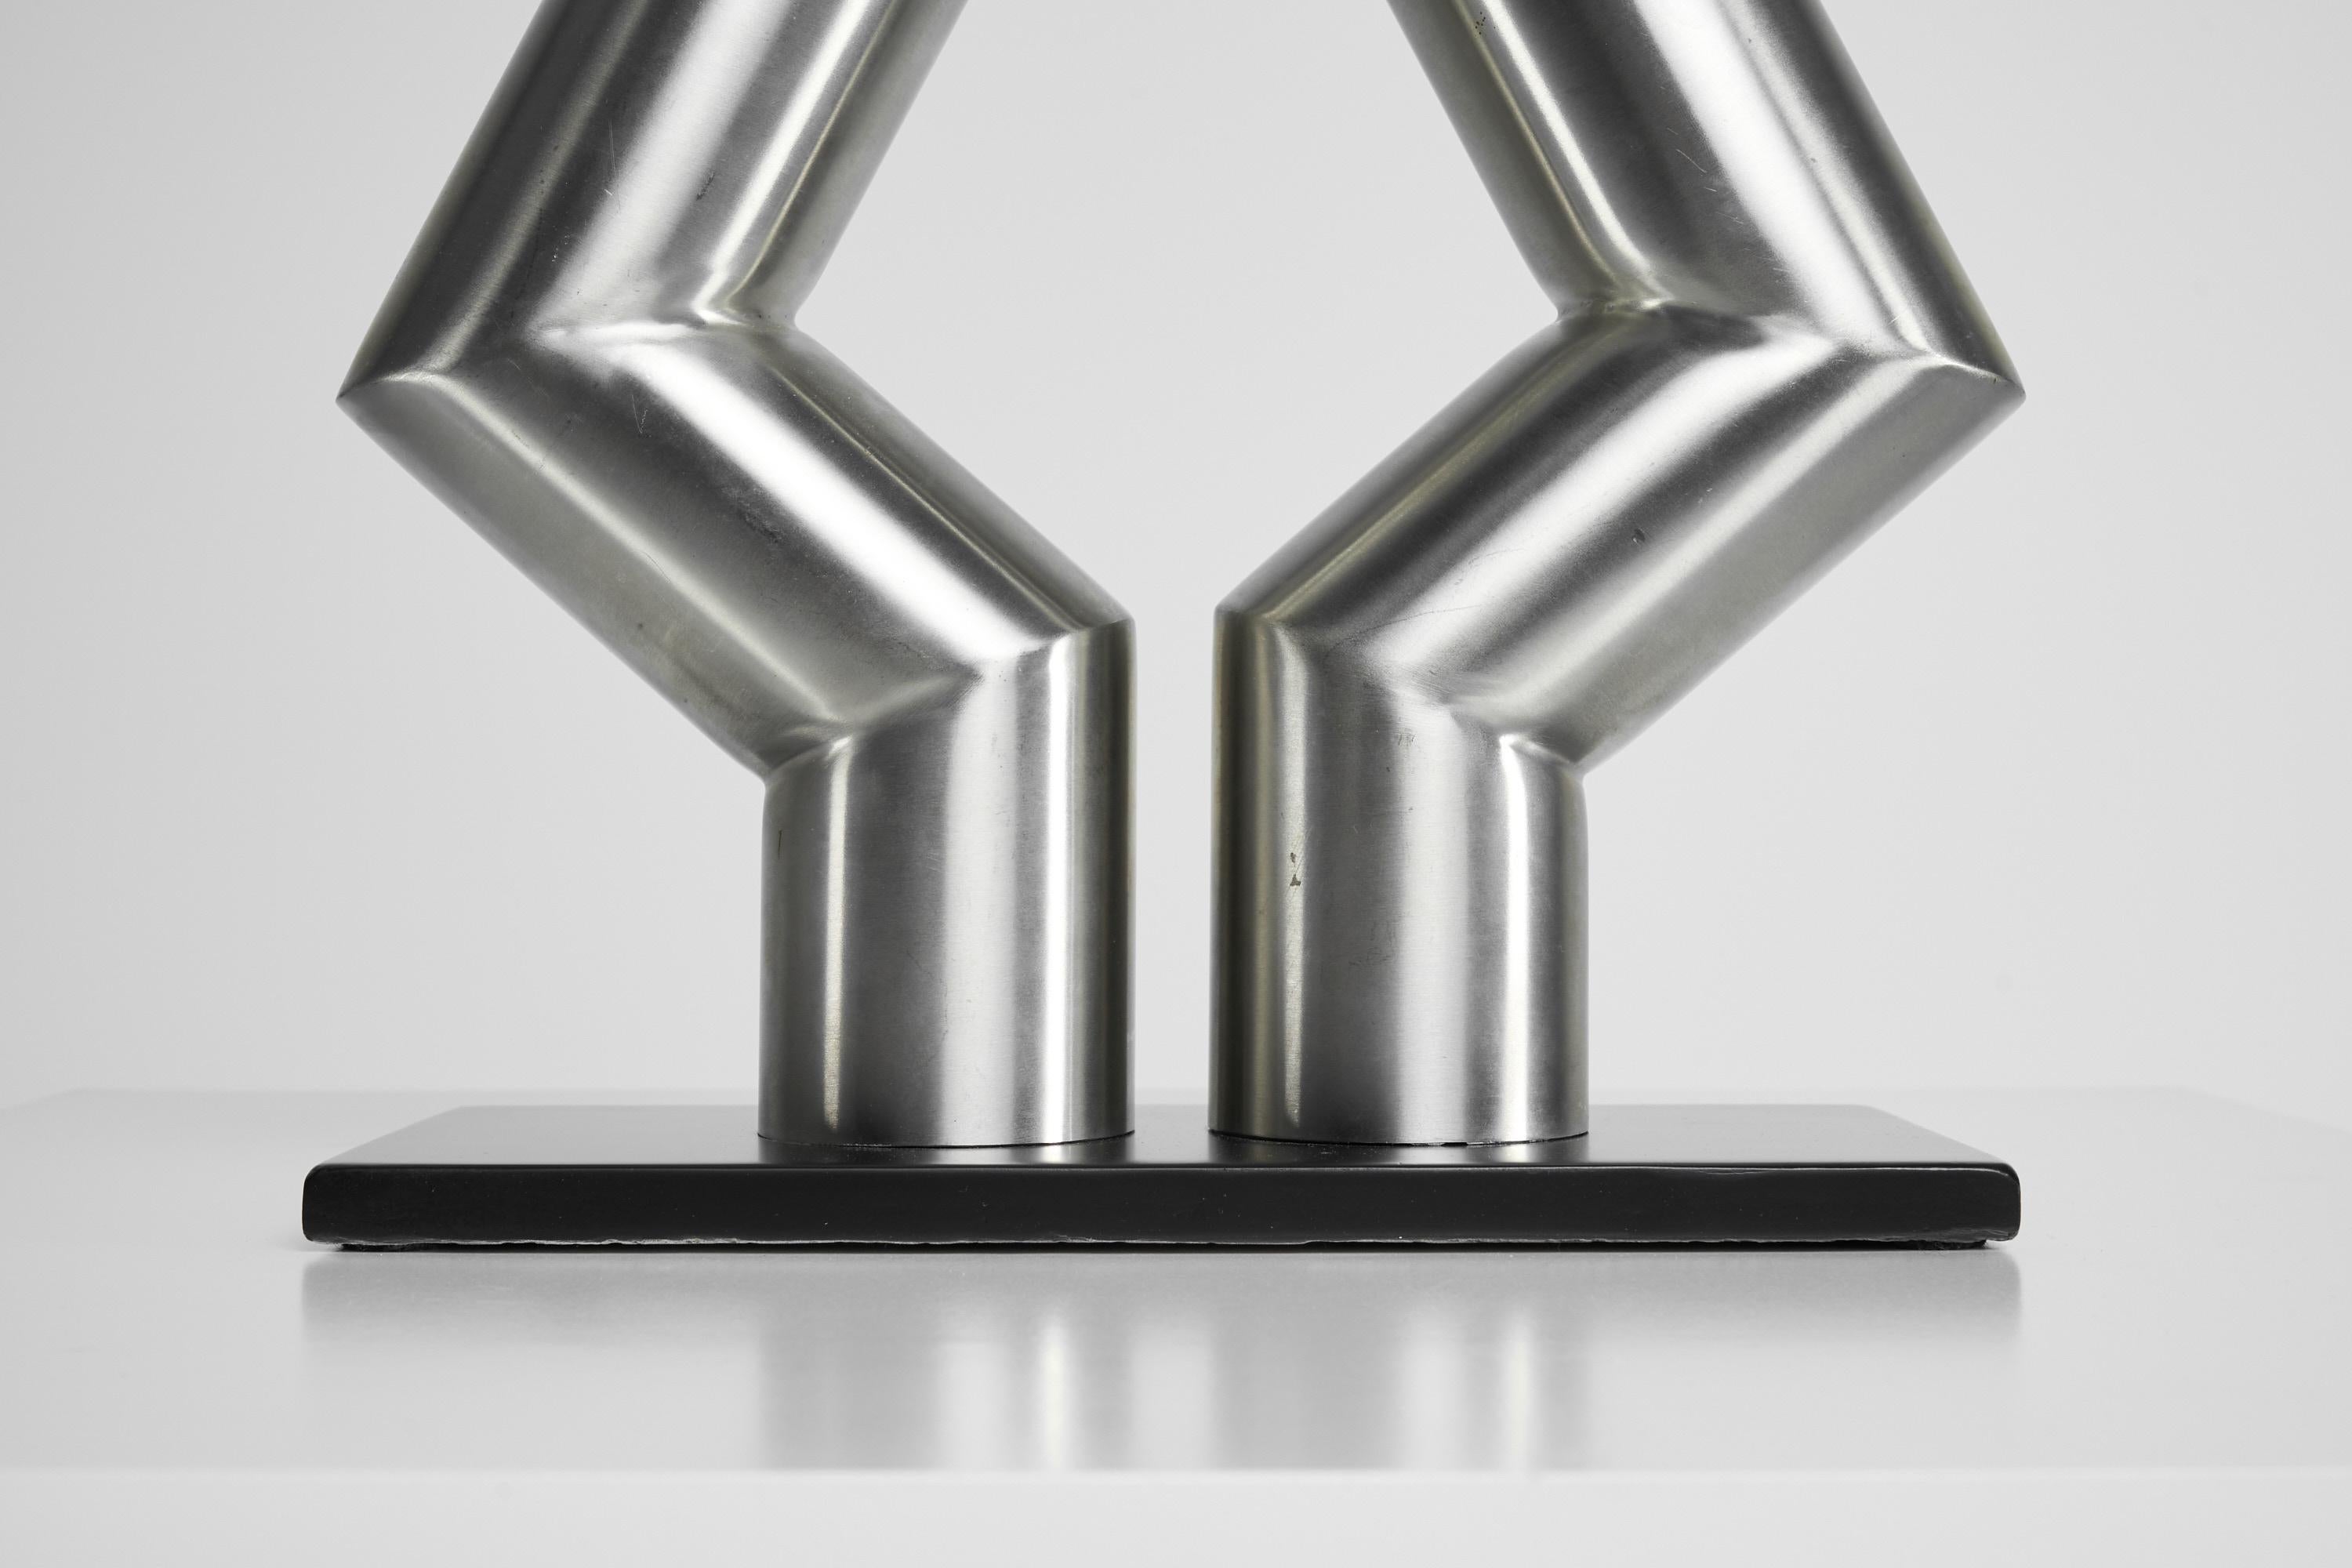 Stunning sized symmetrical sculpture in stainless steel, designed and made by Rudolf Wolf in his own atelier in Amstelveen in 1975. The sculpture is made of 2 stainless steel tubes, cut, and welded perfectly into this abstract modern shape; it has a